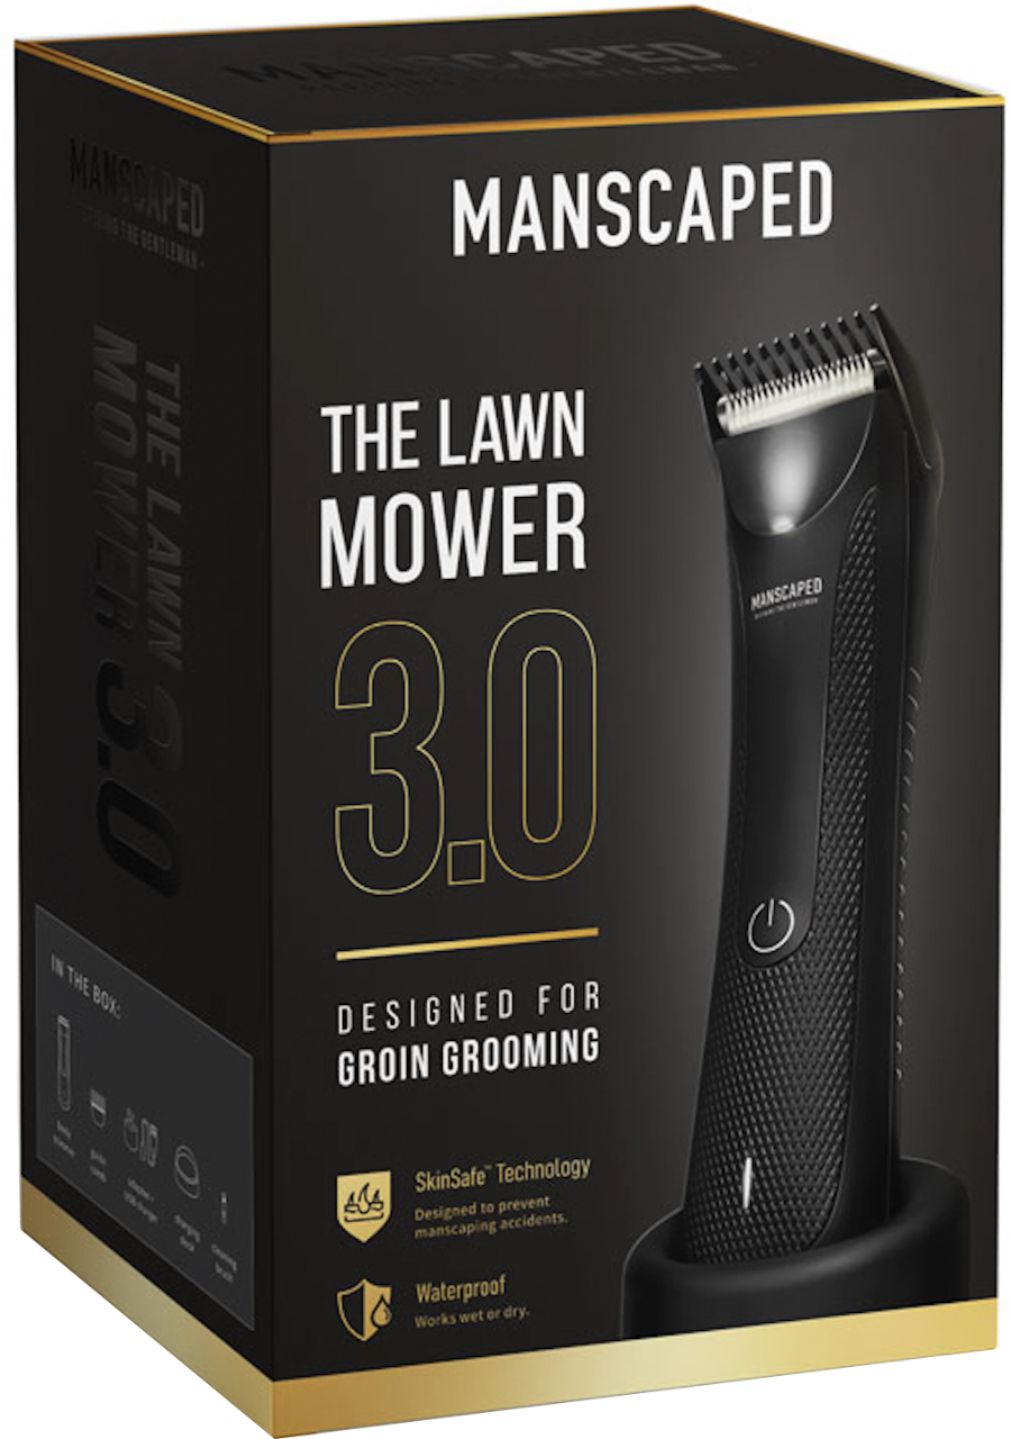 manscaping shaver